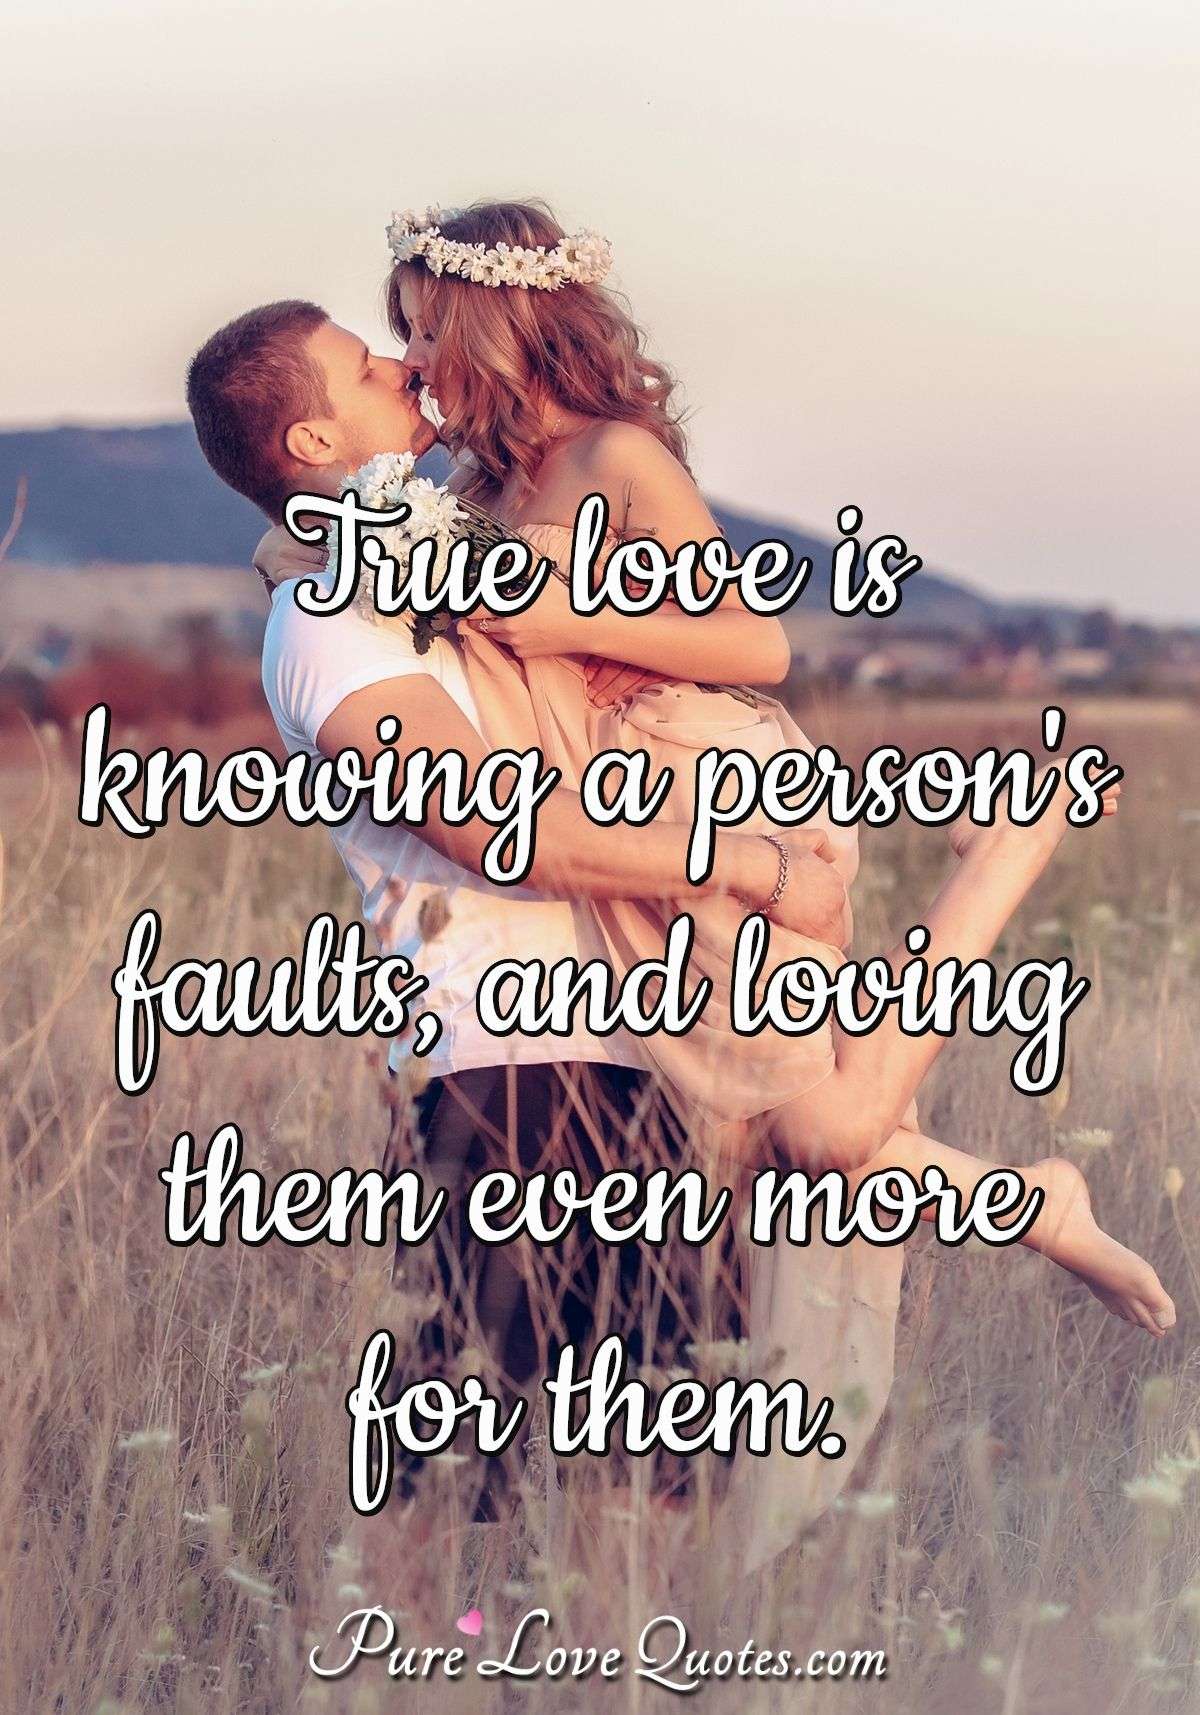 People Do Not Know The Meaning Of True Love - Love Quotes